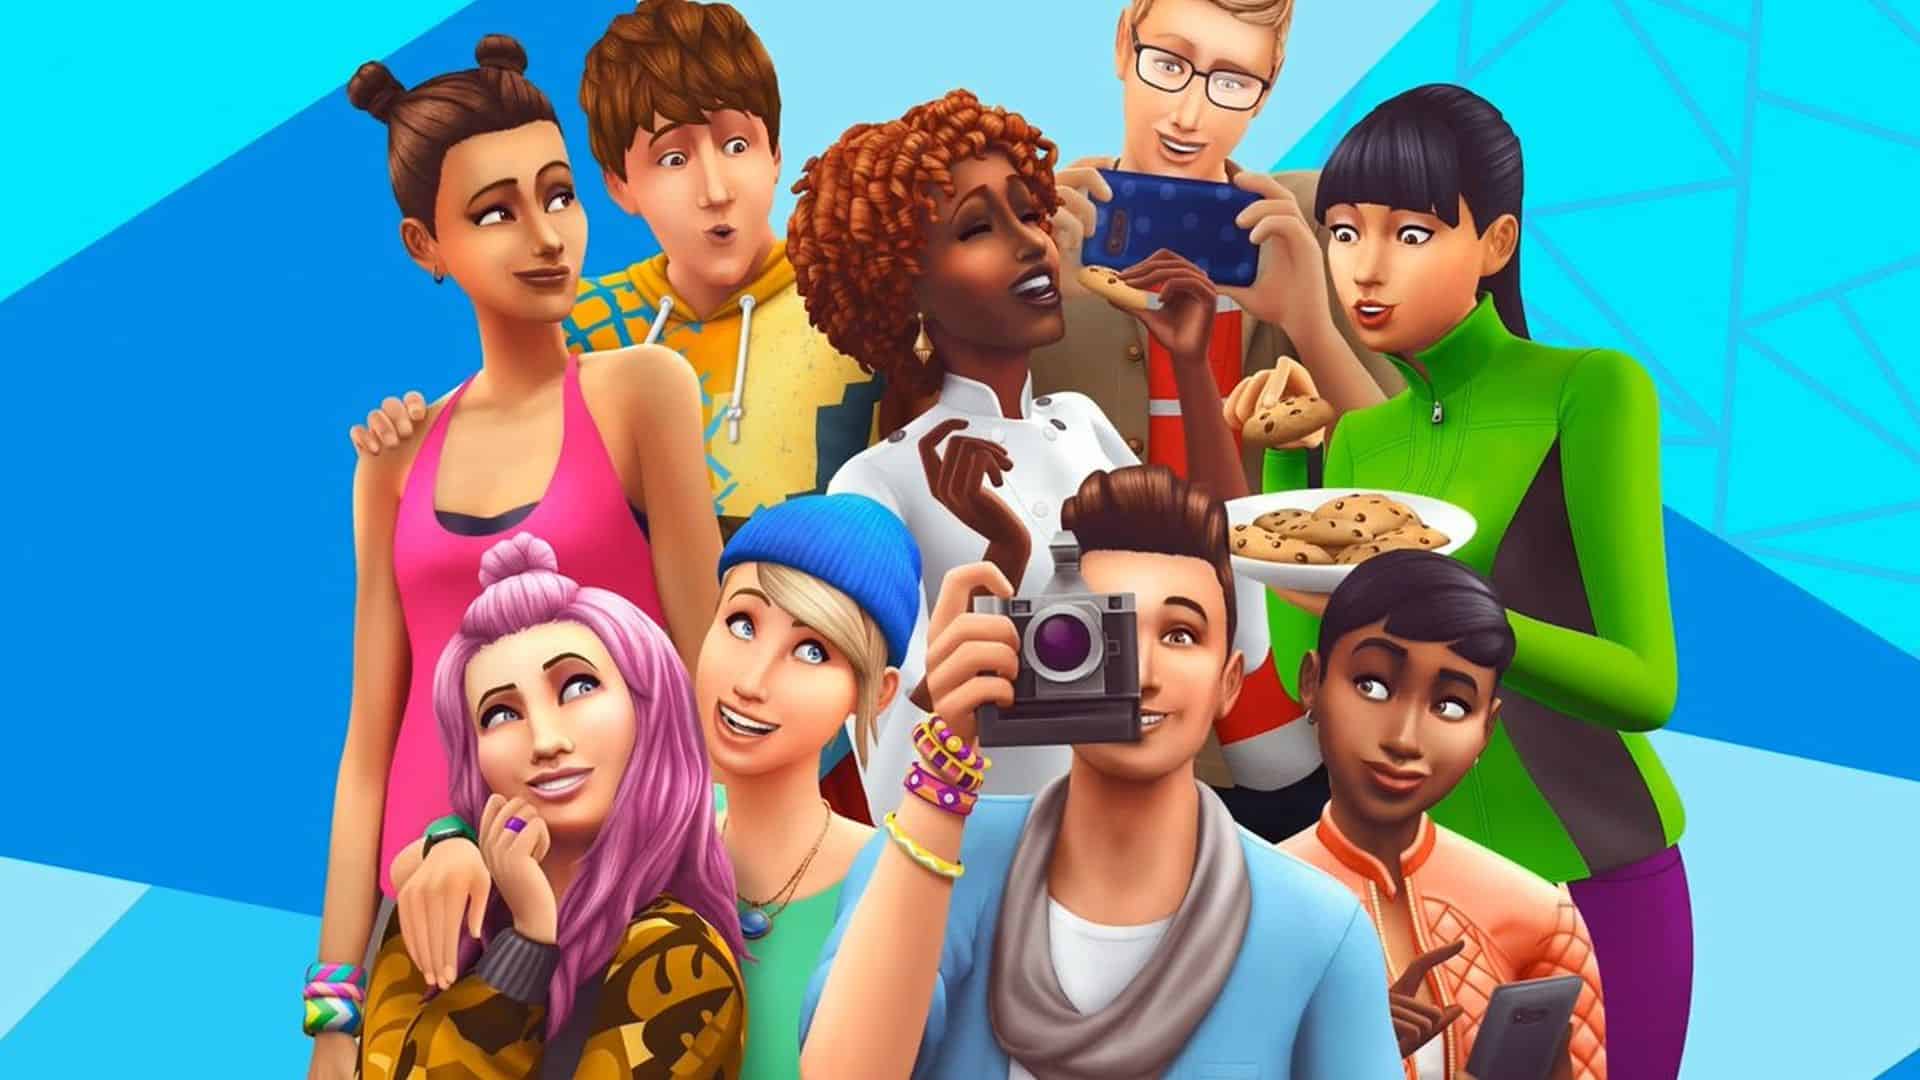 Play With Life: Celebrating All The Ways The Sims Has Impacted Millions Of Lives